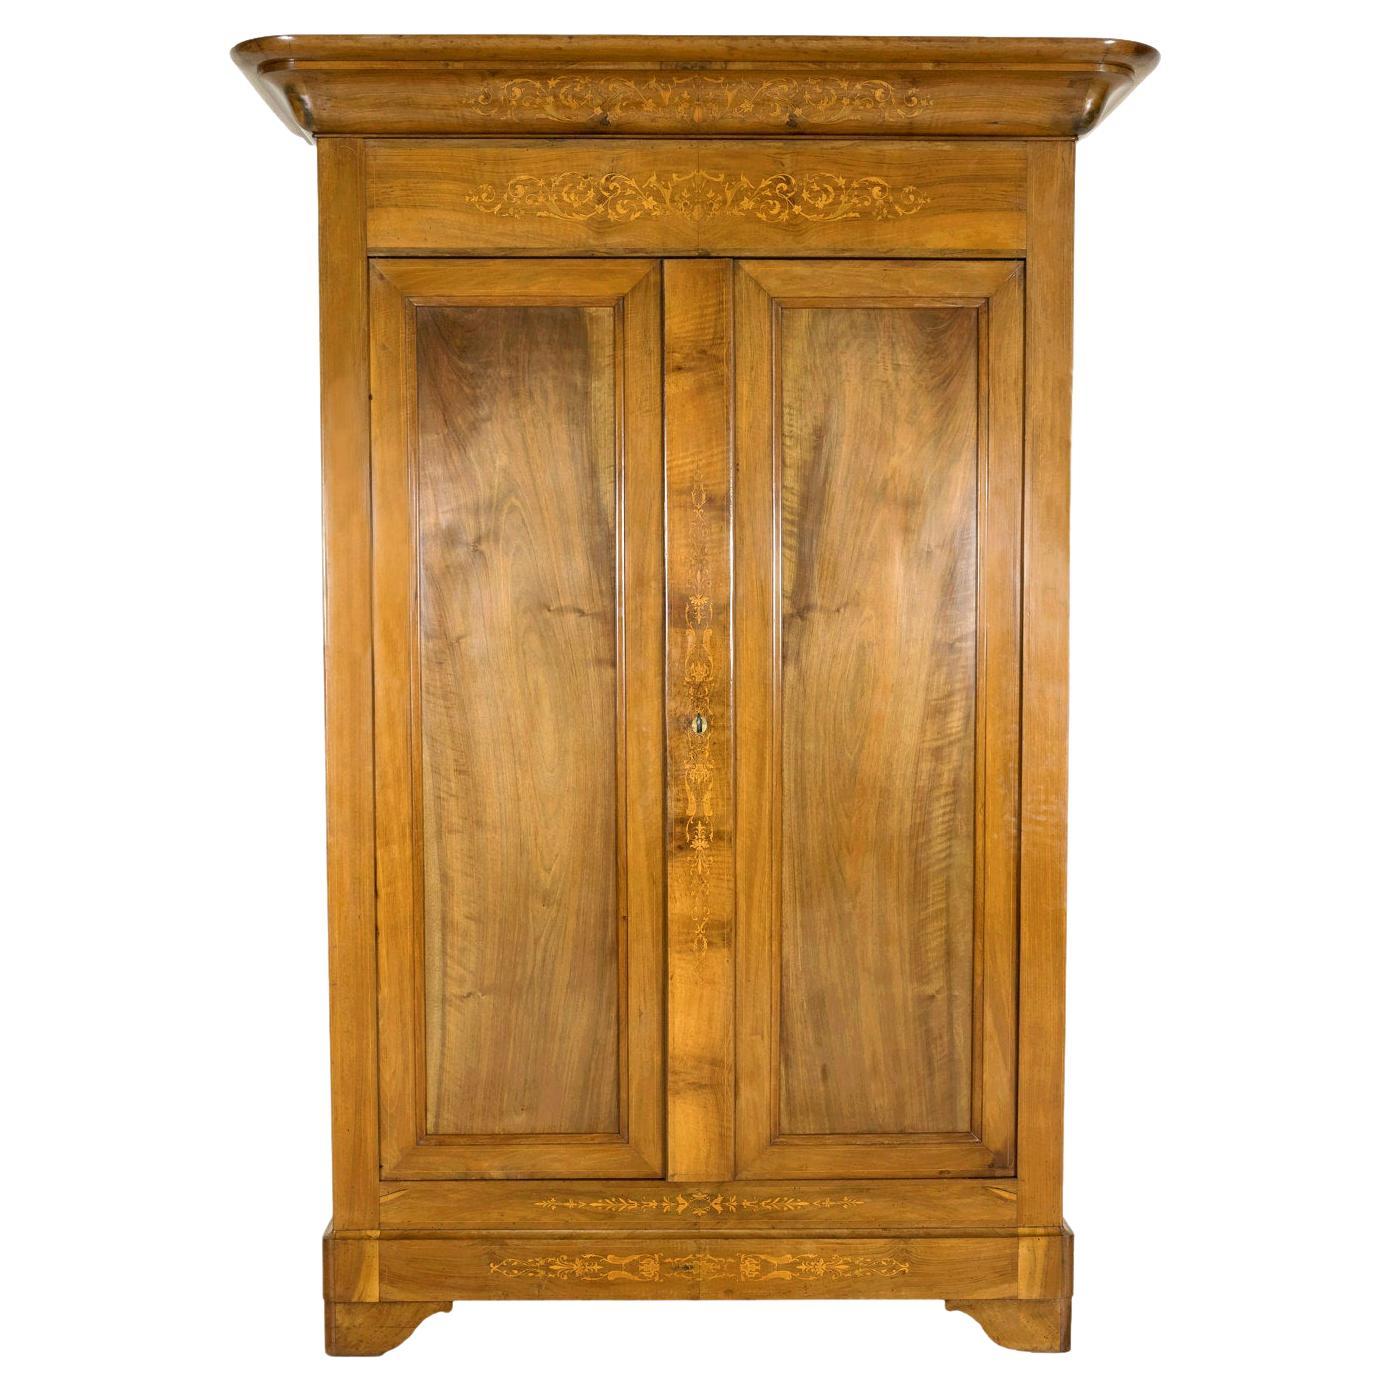 19th Century French Restauration Period Walnut Armoire with Fruitwood Marquetry